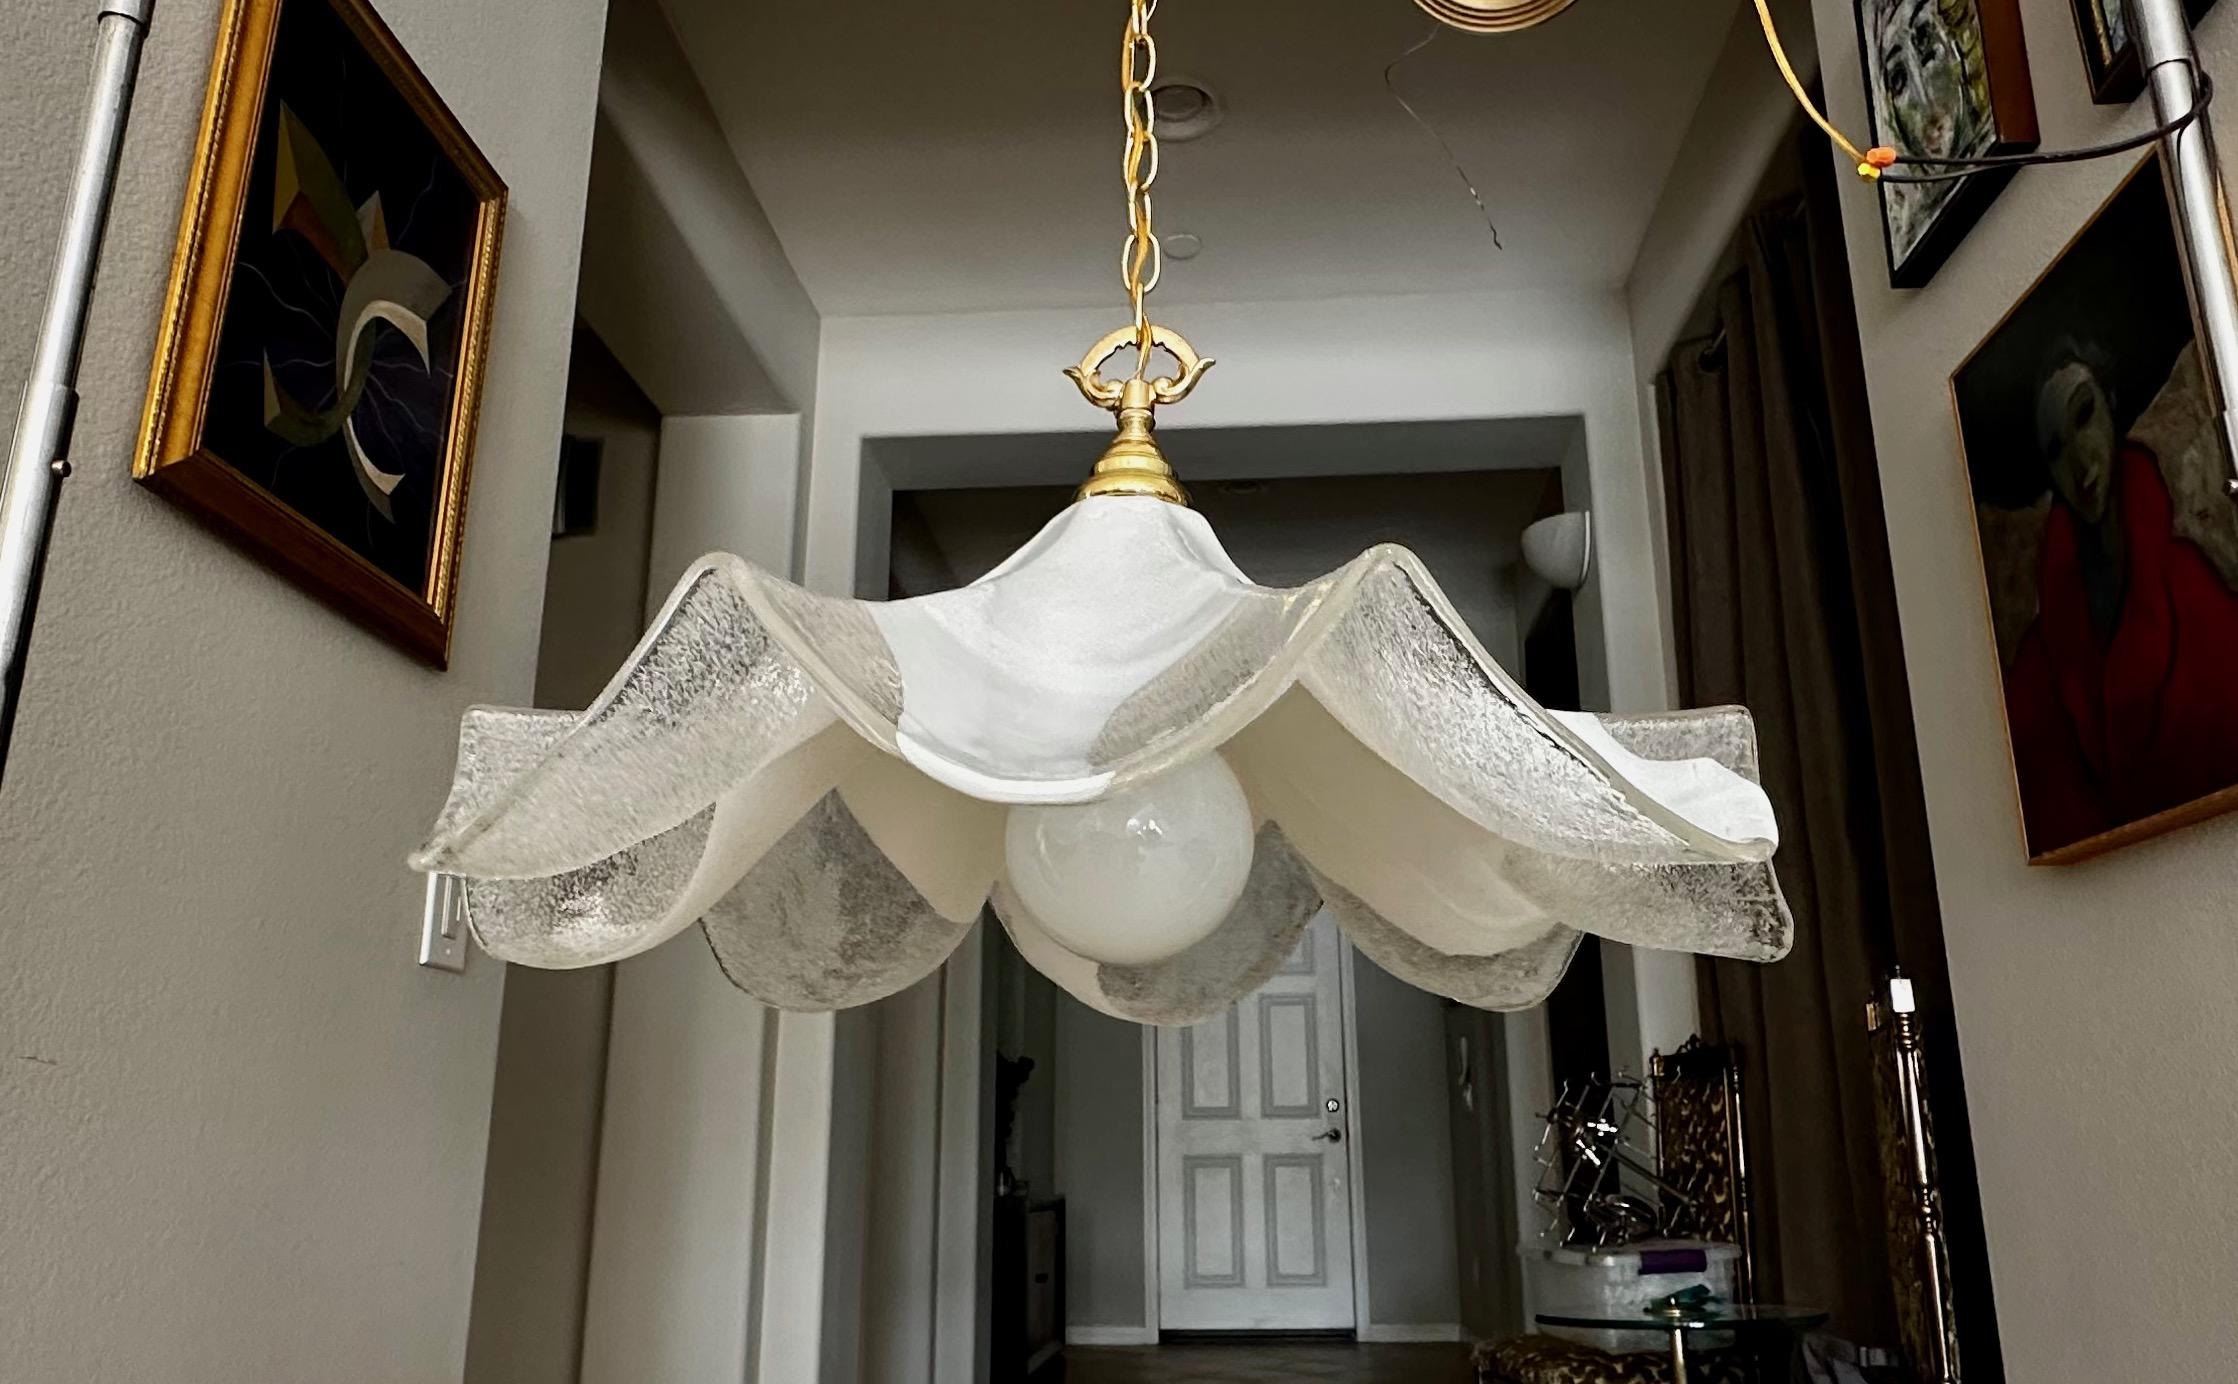 Very large Italian Mazzega flutted shape pendant ceiling light. The hand blown glass is clear and white, the inside has fine scattered particles of glass to defuse the light. Murano fixture uses regular A base bulb. The light bulb used in photos is